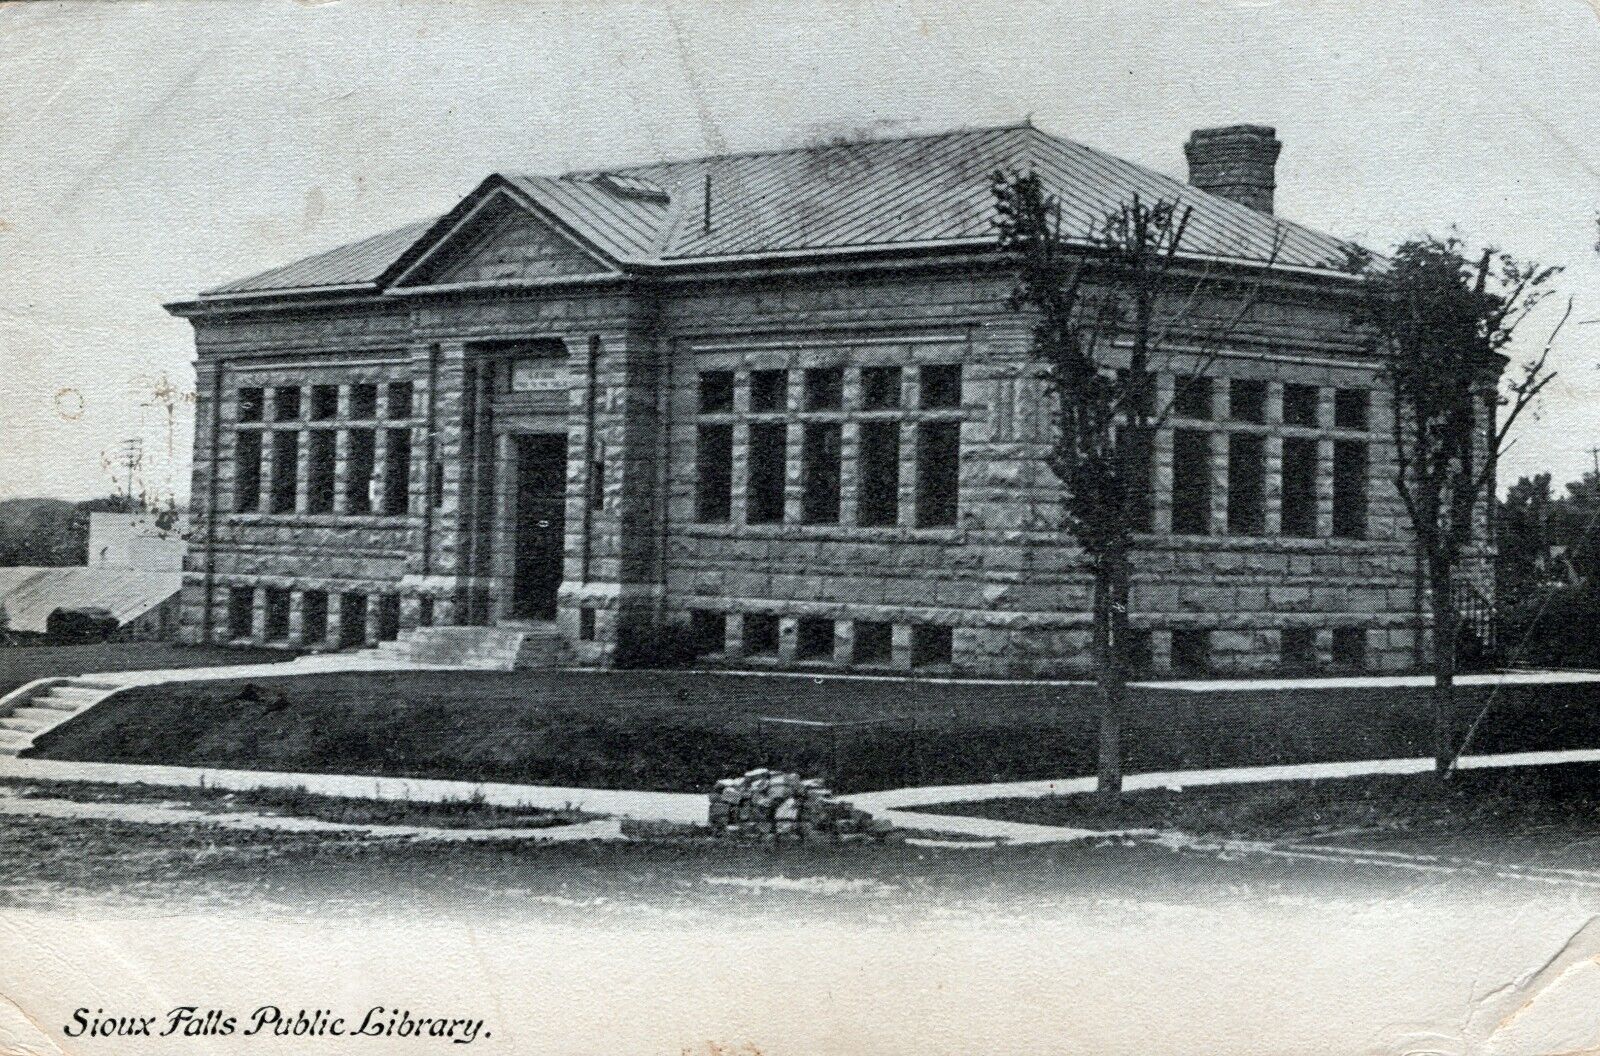 RPPC - Sioux Falls Public Library. Posted in 1905 Real Photo Postcard